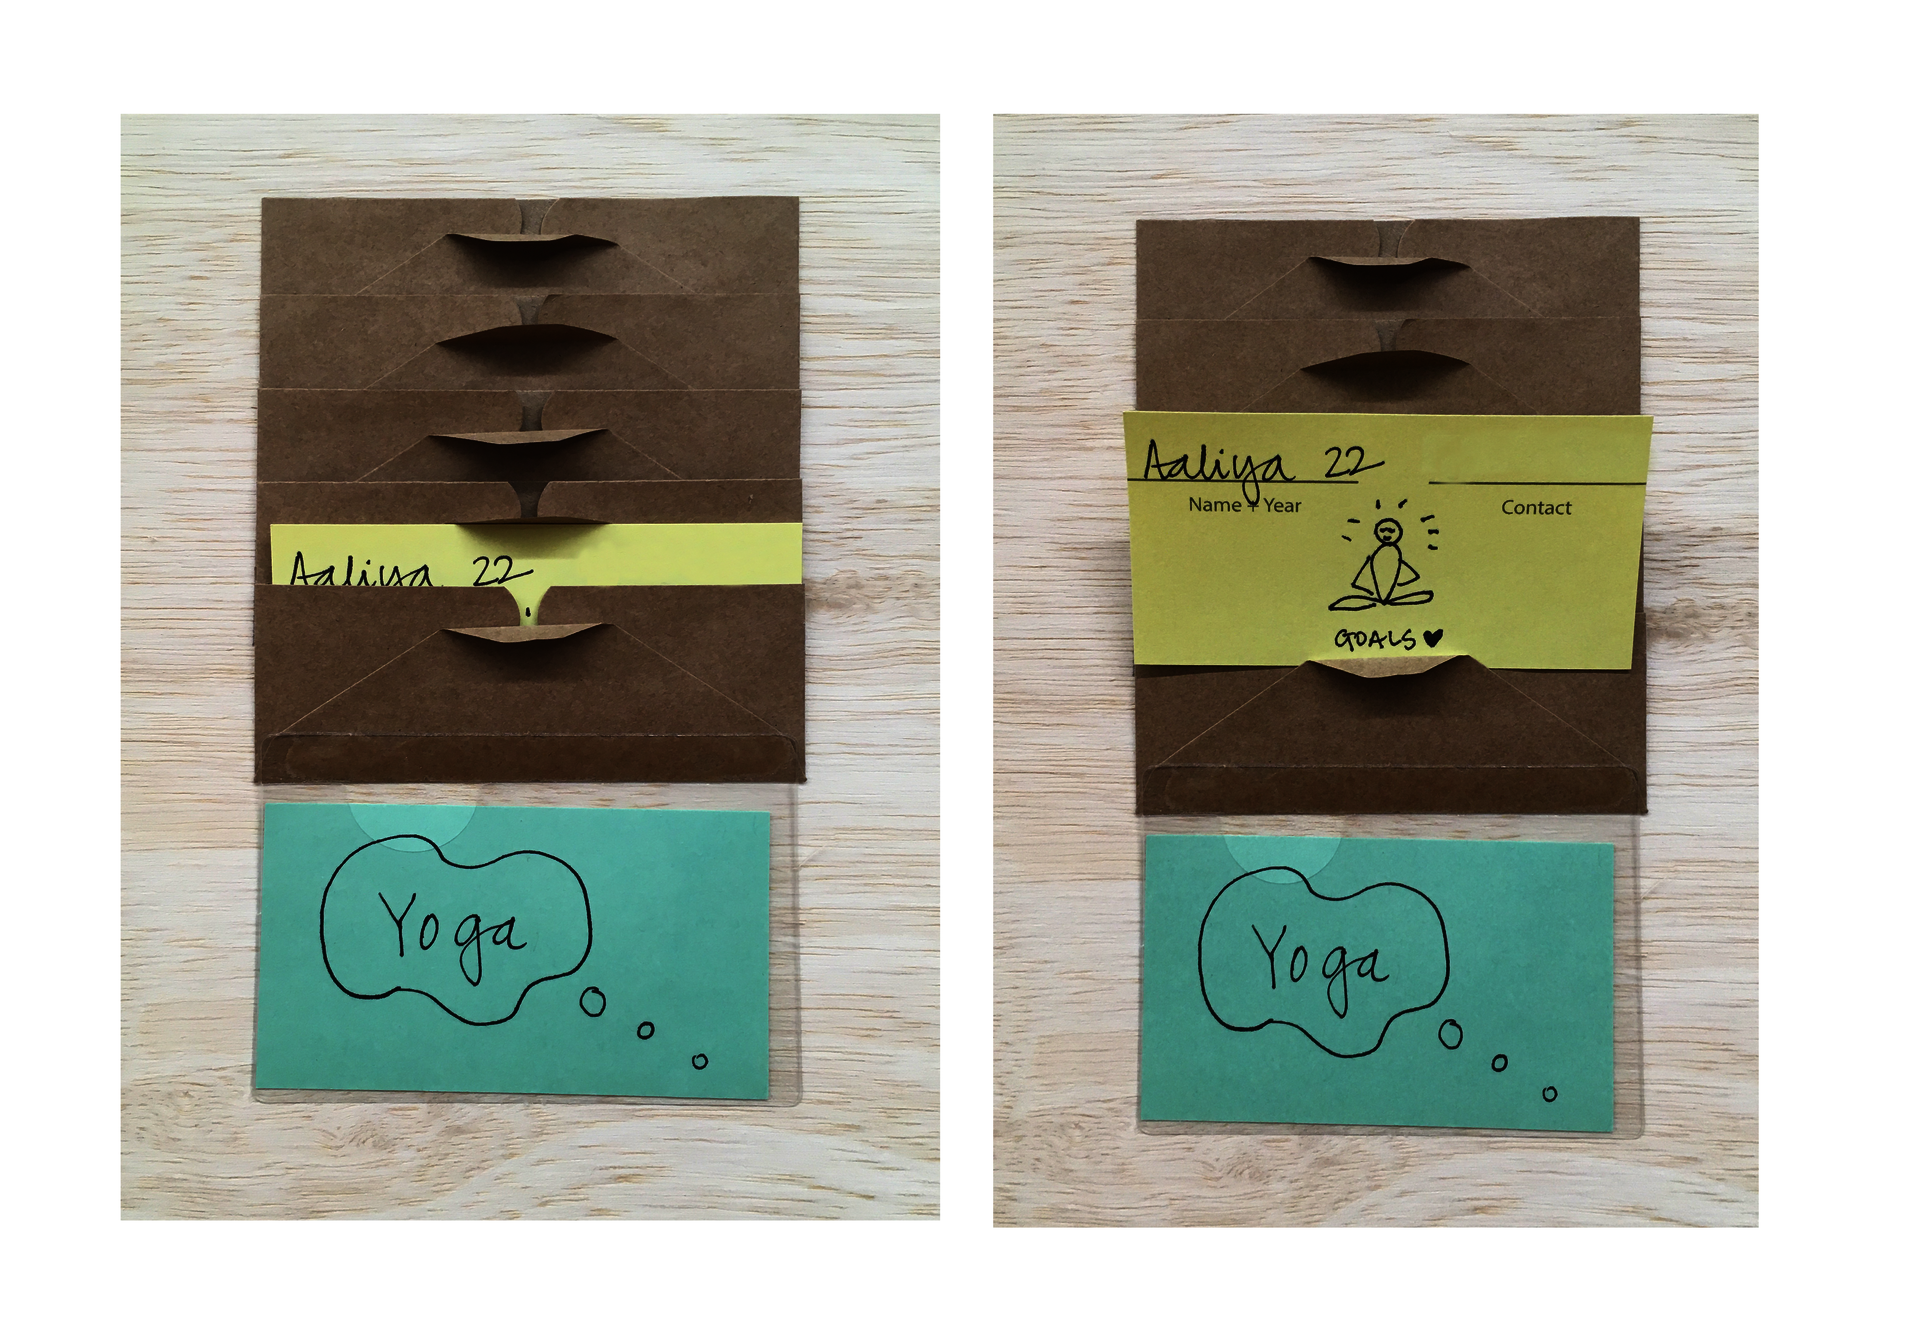 A detailed image of the share share board. A green card with the word yoga written and then a card in an envelope above with the name Aaliya on it. 